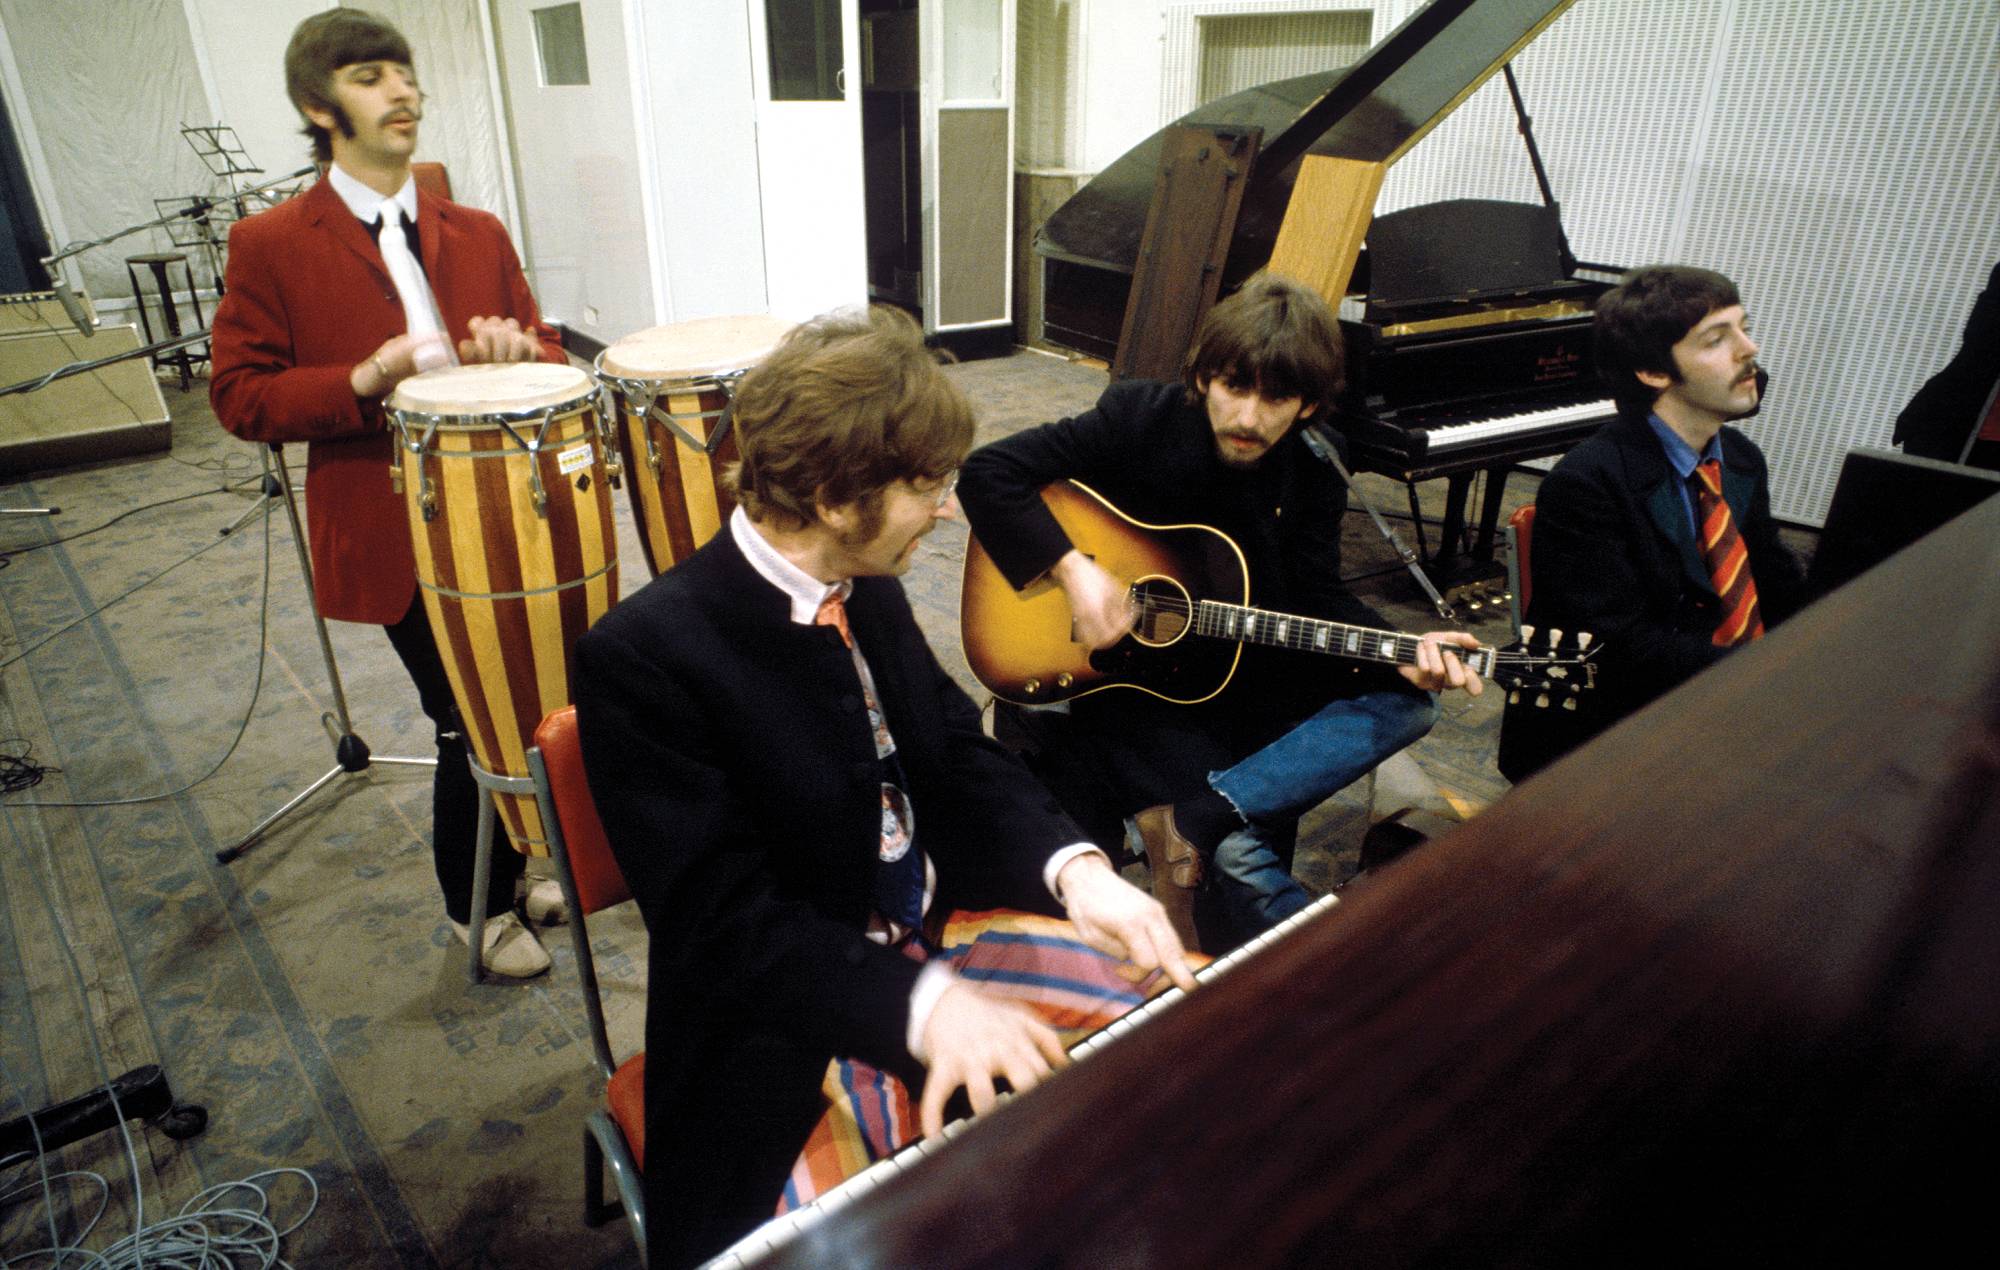 The Beatles announce release of “final” song ‘Now And Then’ and expanded ‘Red’ and ‘Blue’ albums